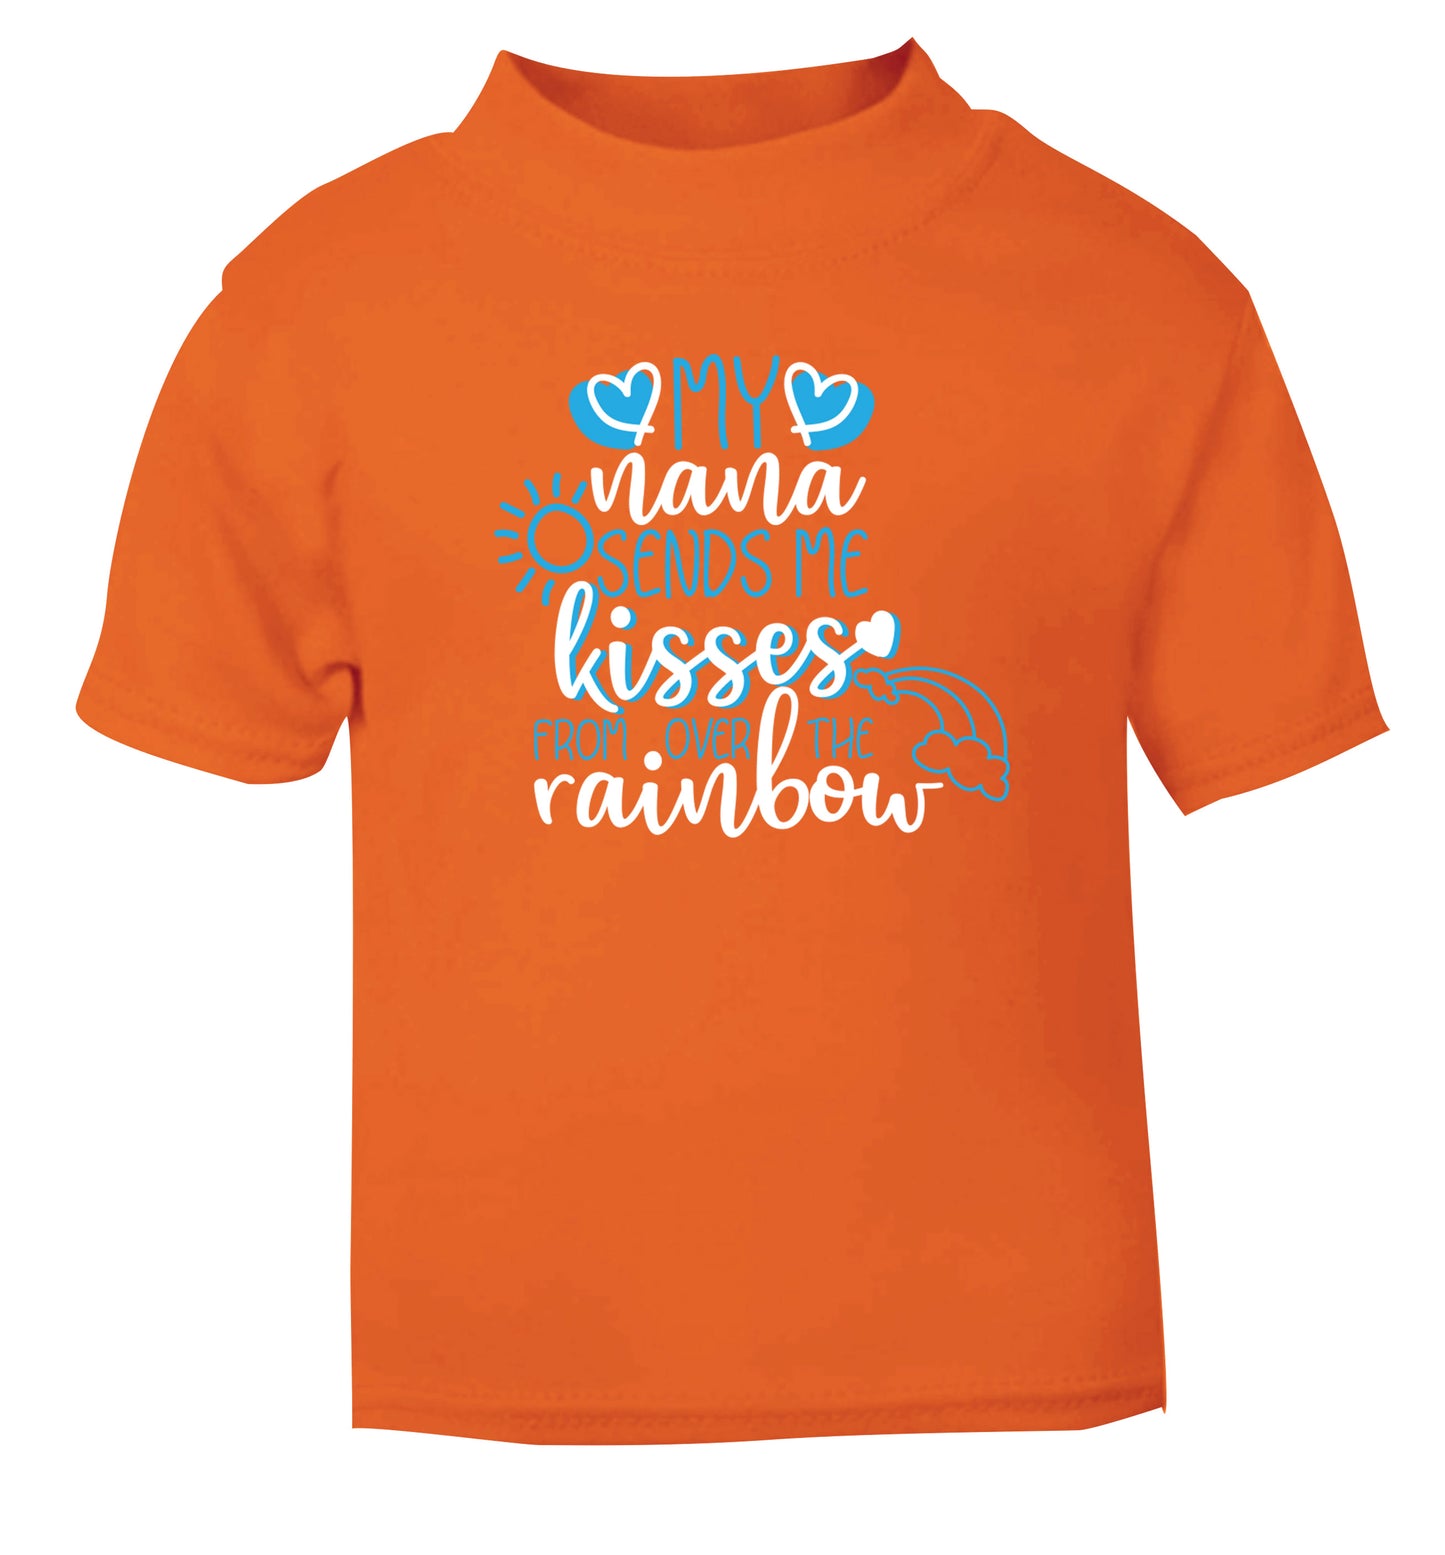 My nana sends me kisses from over the rainbow orange Baby Toddler Tshirt 2 Years